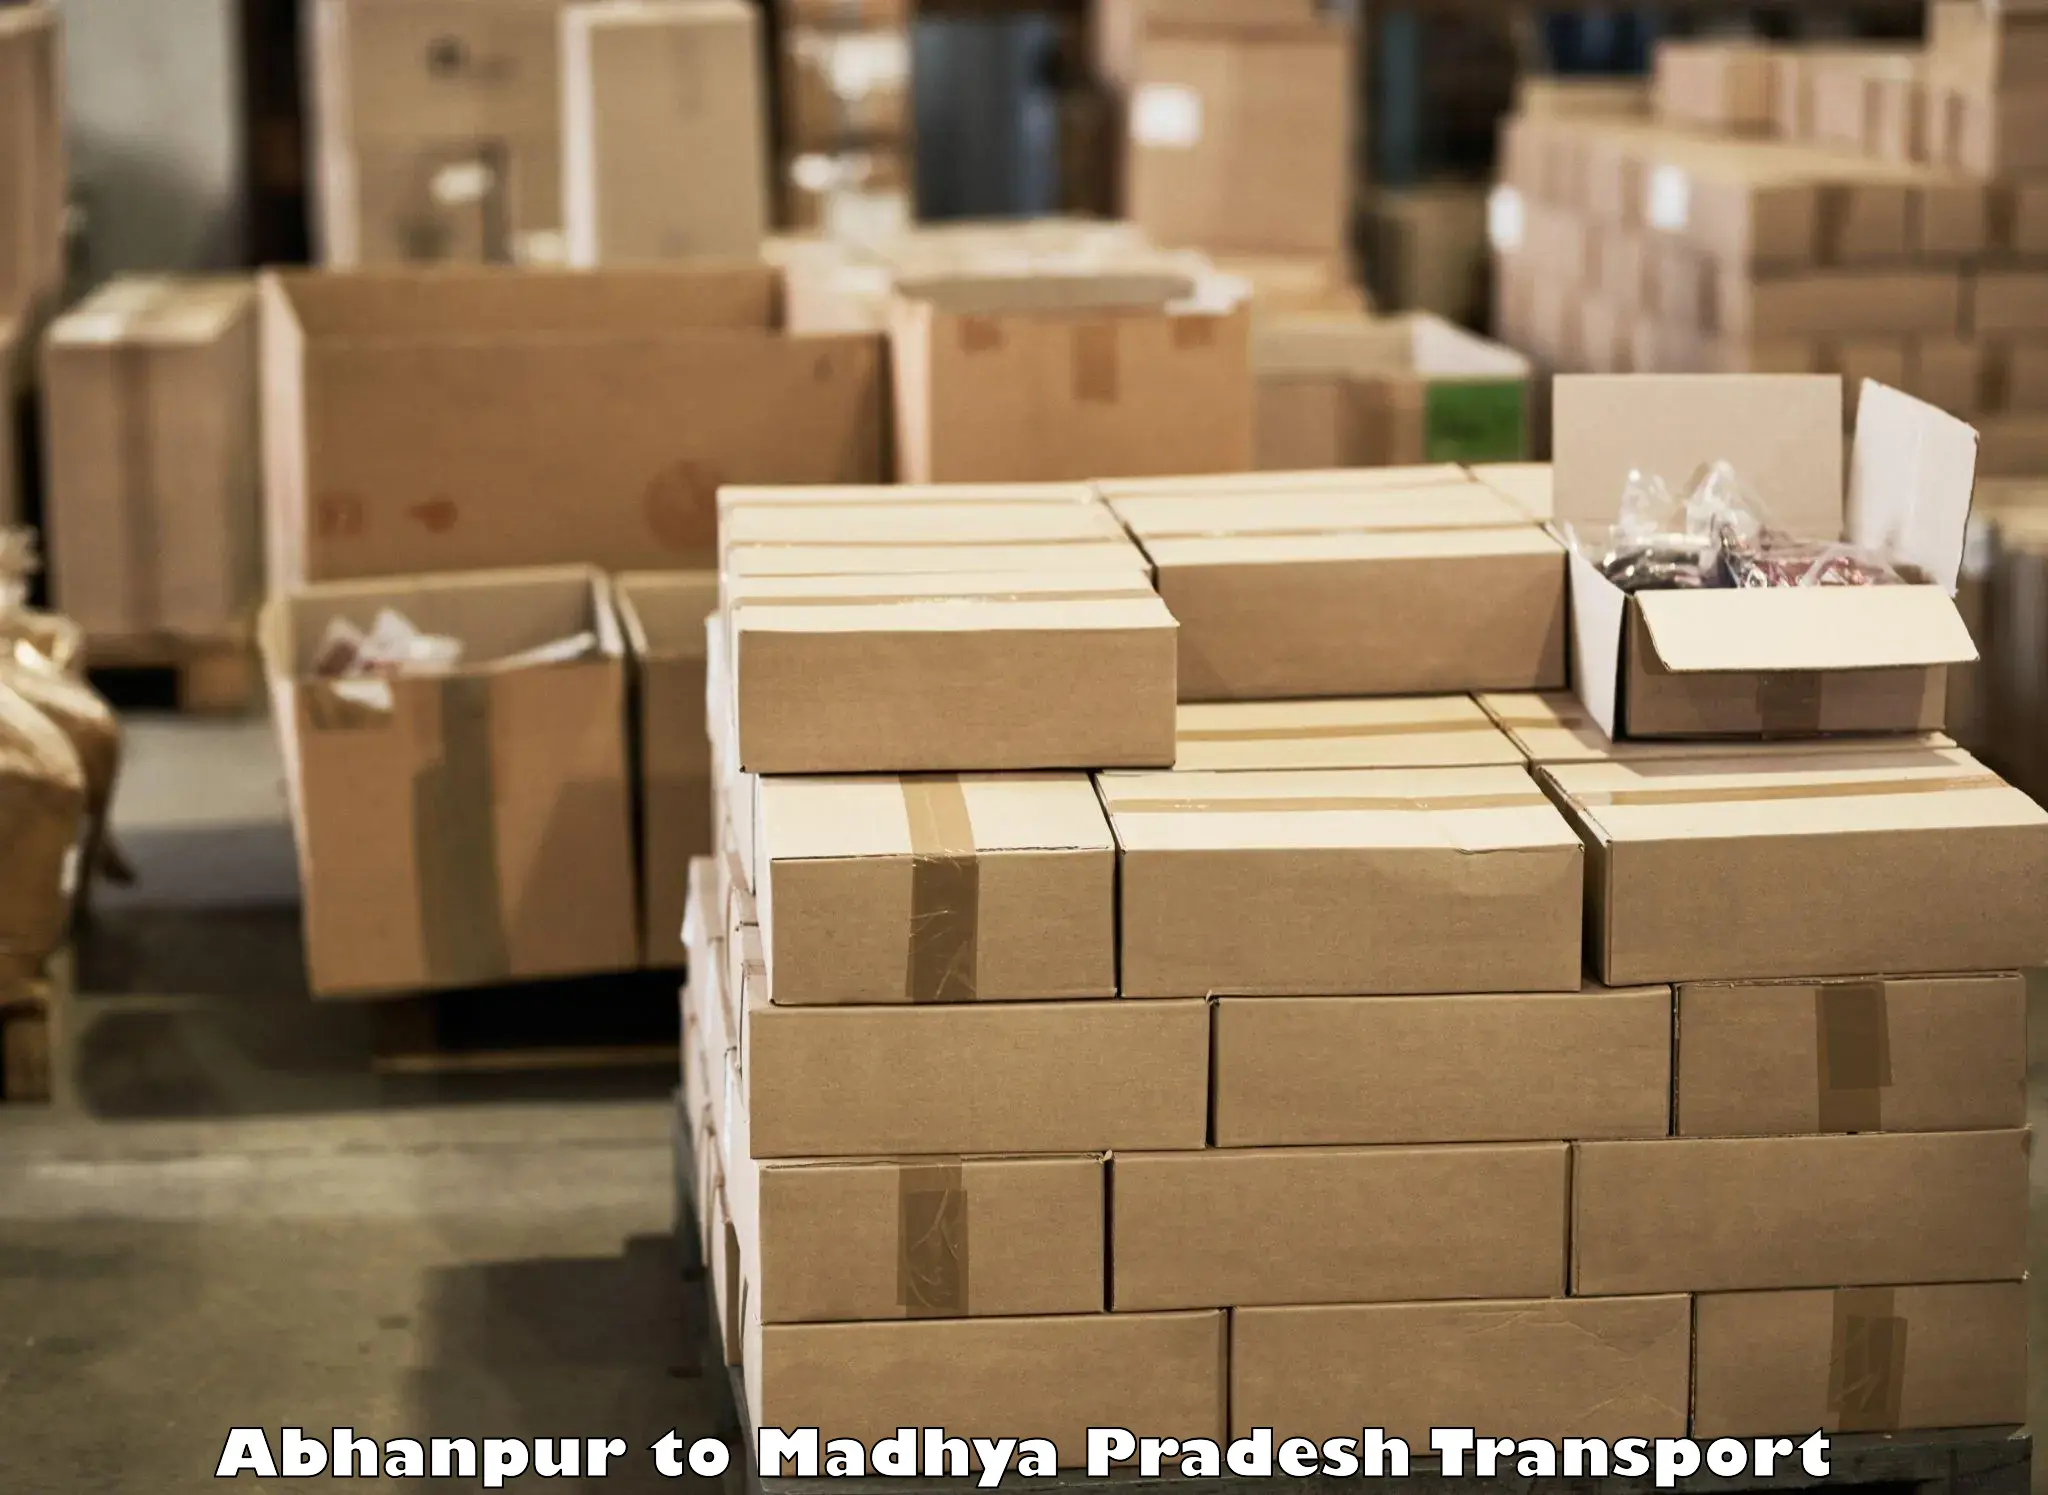 Domestic goods transportation services in Abhanpur to Dewas